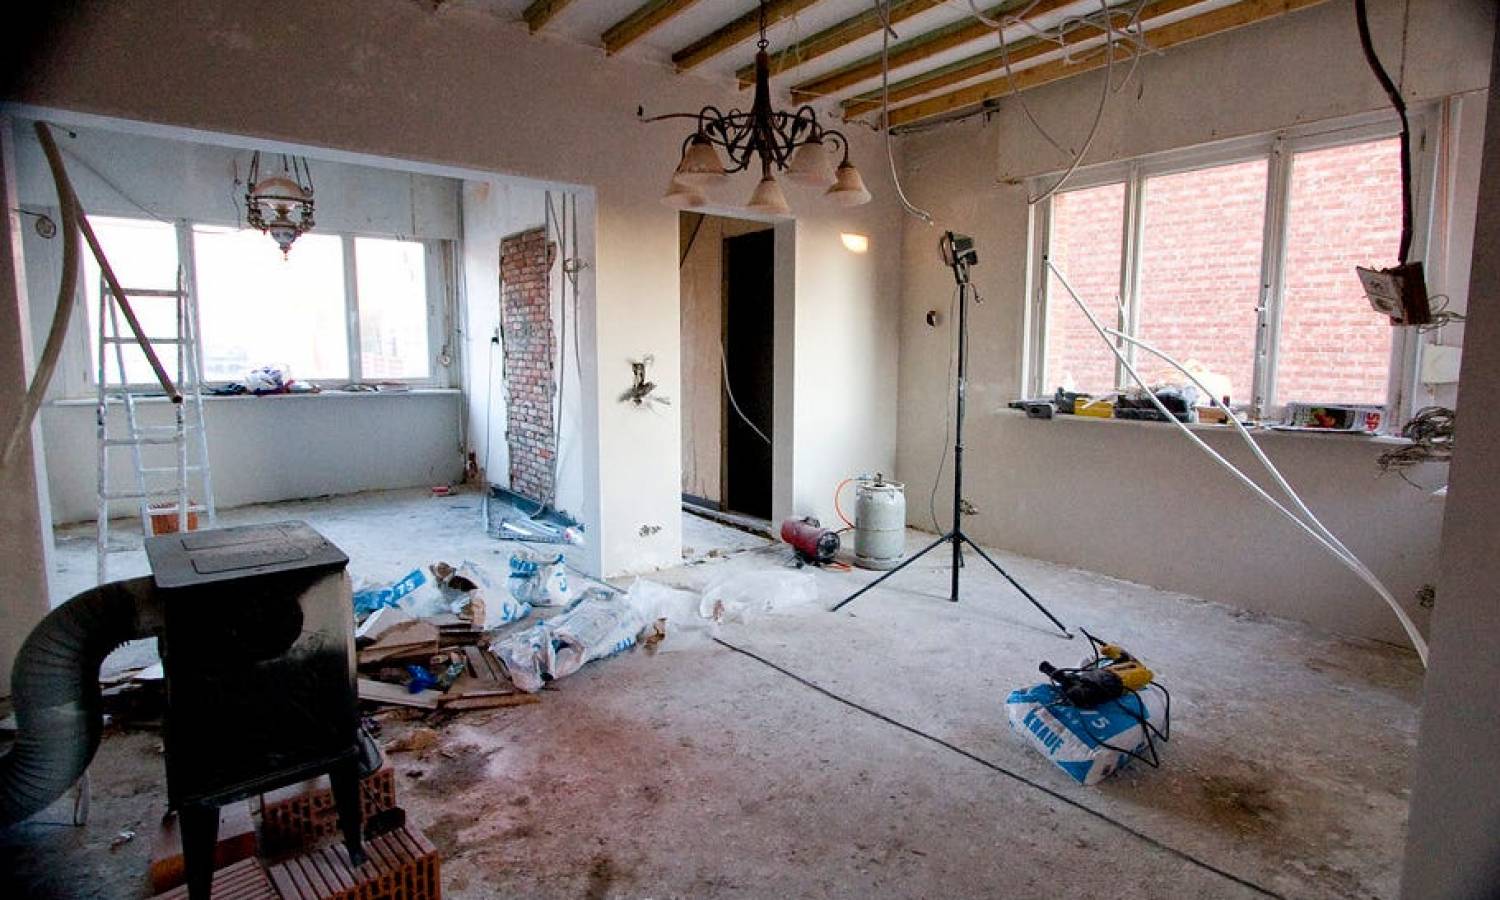 Which room is the most expensive to renovate